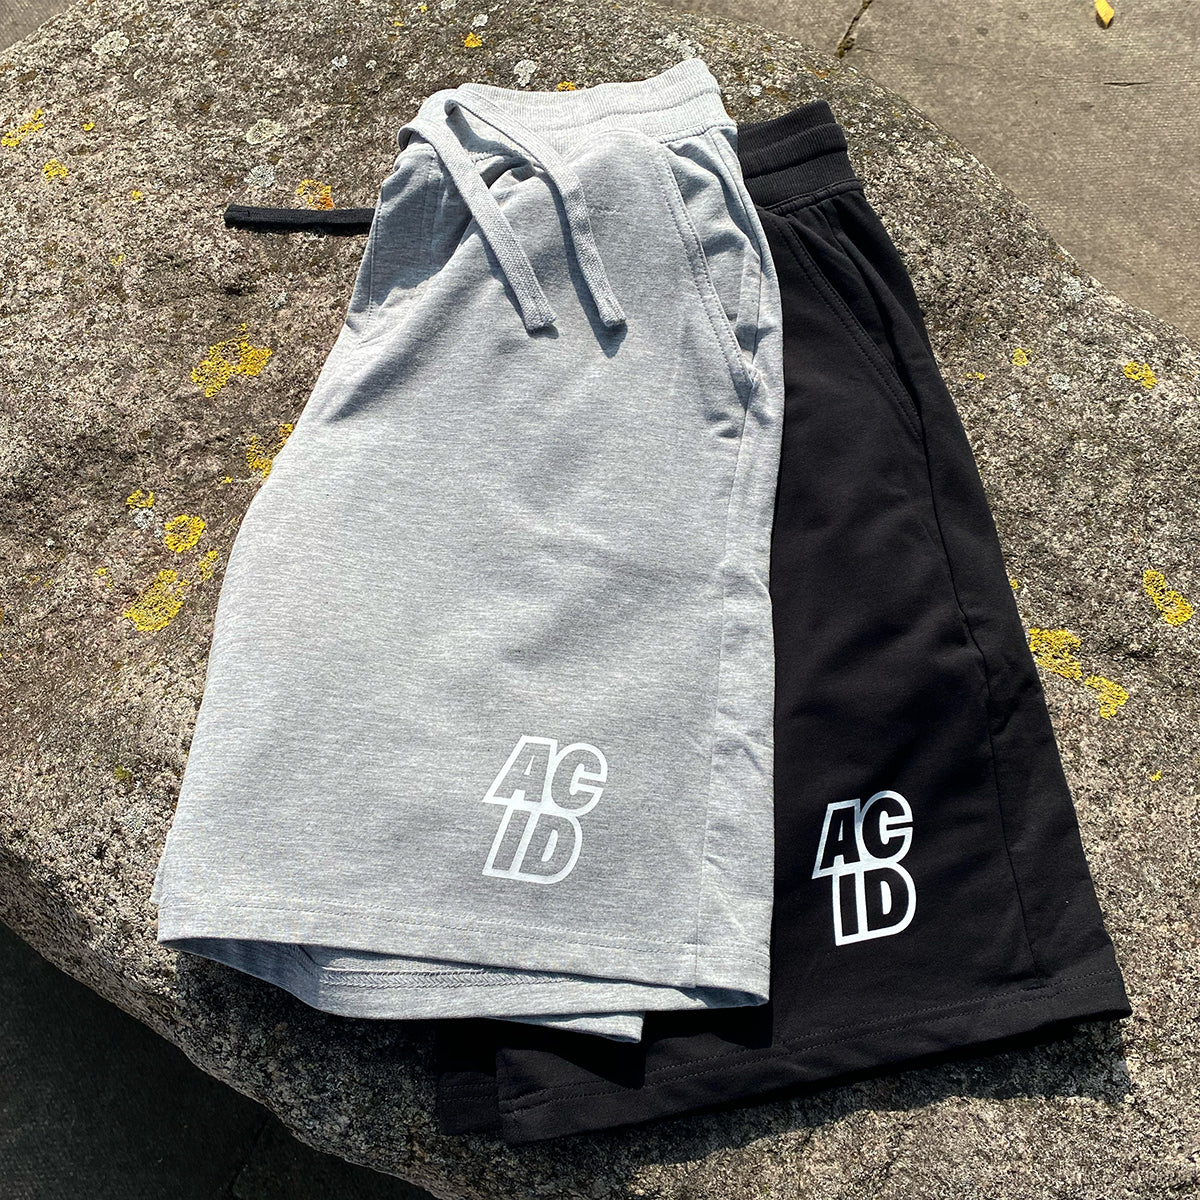 Acid Sport - Jersey Shorts - Black - Wasted Heroes